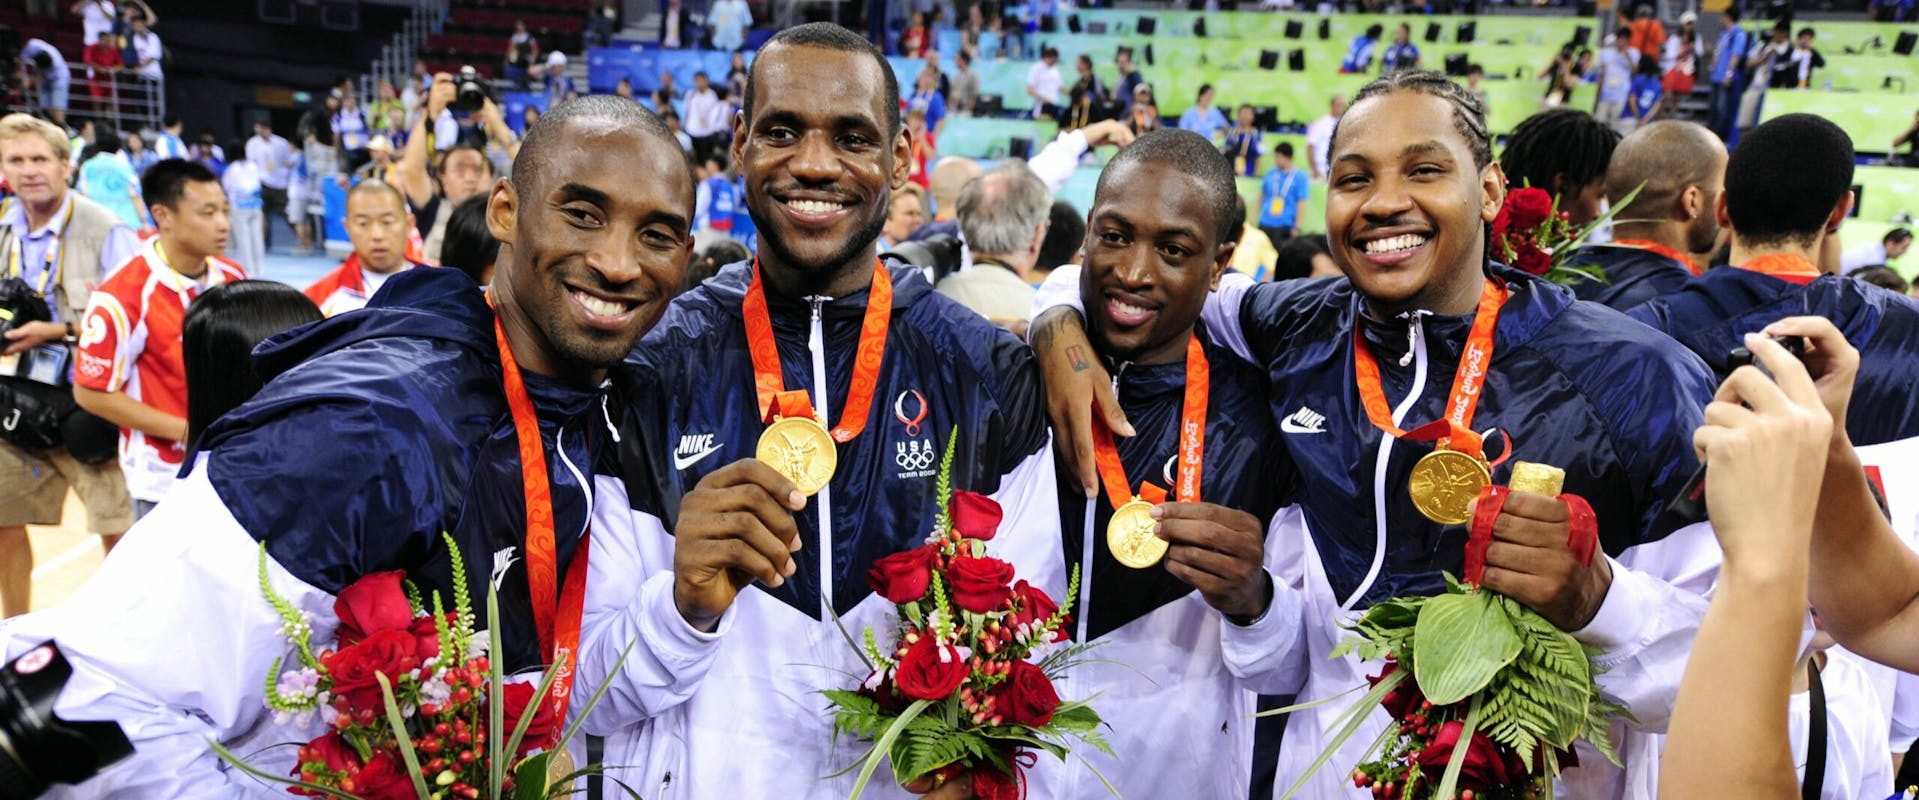 2008 Men's Olympic Basketball players (L-R) Kobe Bryant, Lebron James, Dwyane Wade, Carmelo Anthony pose with their gold medals at the 2008 Summer Olympic Games.